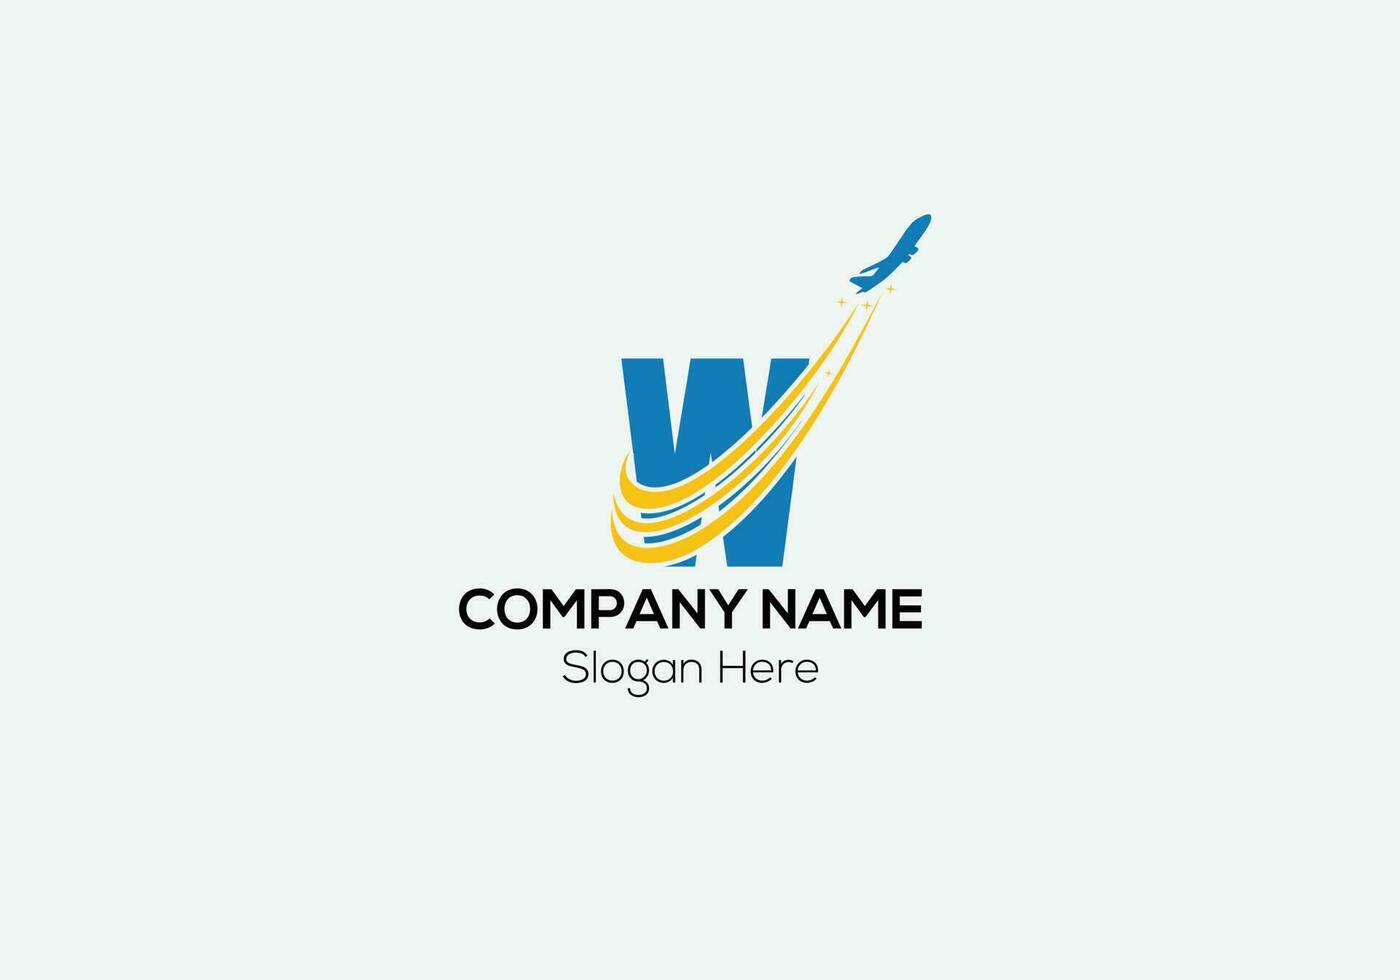 Travel Logo On Letter W Template. Travel Logo On W Letter, Initial Travel Sign Concept Template vector